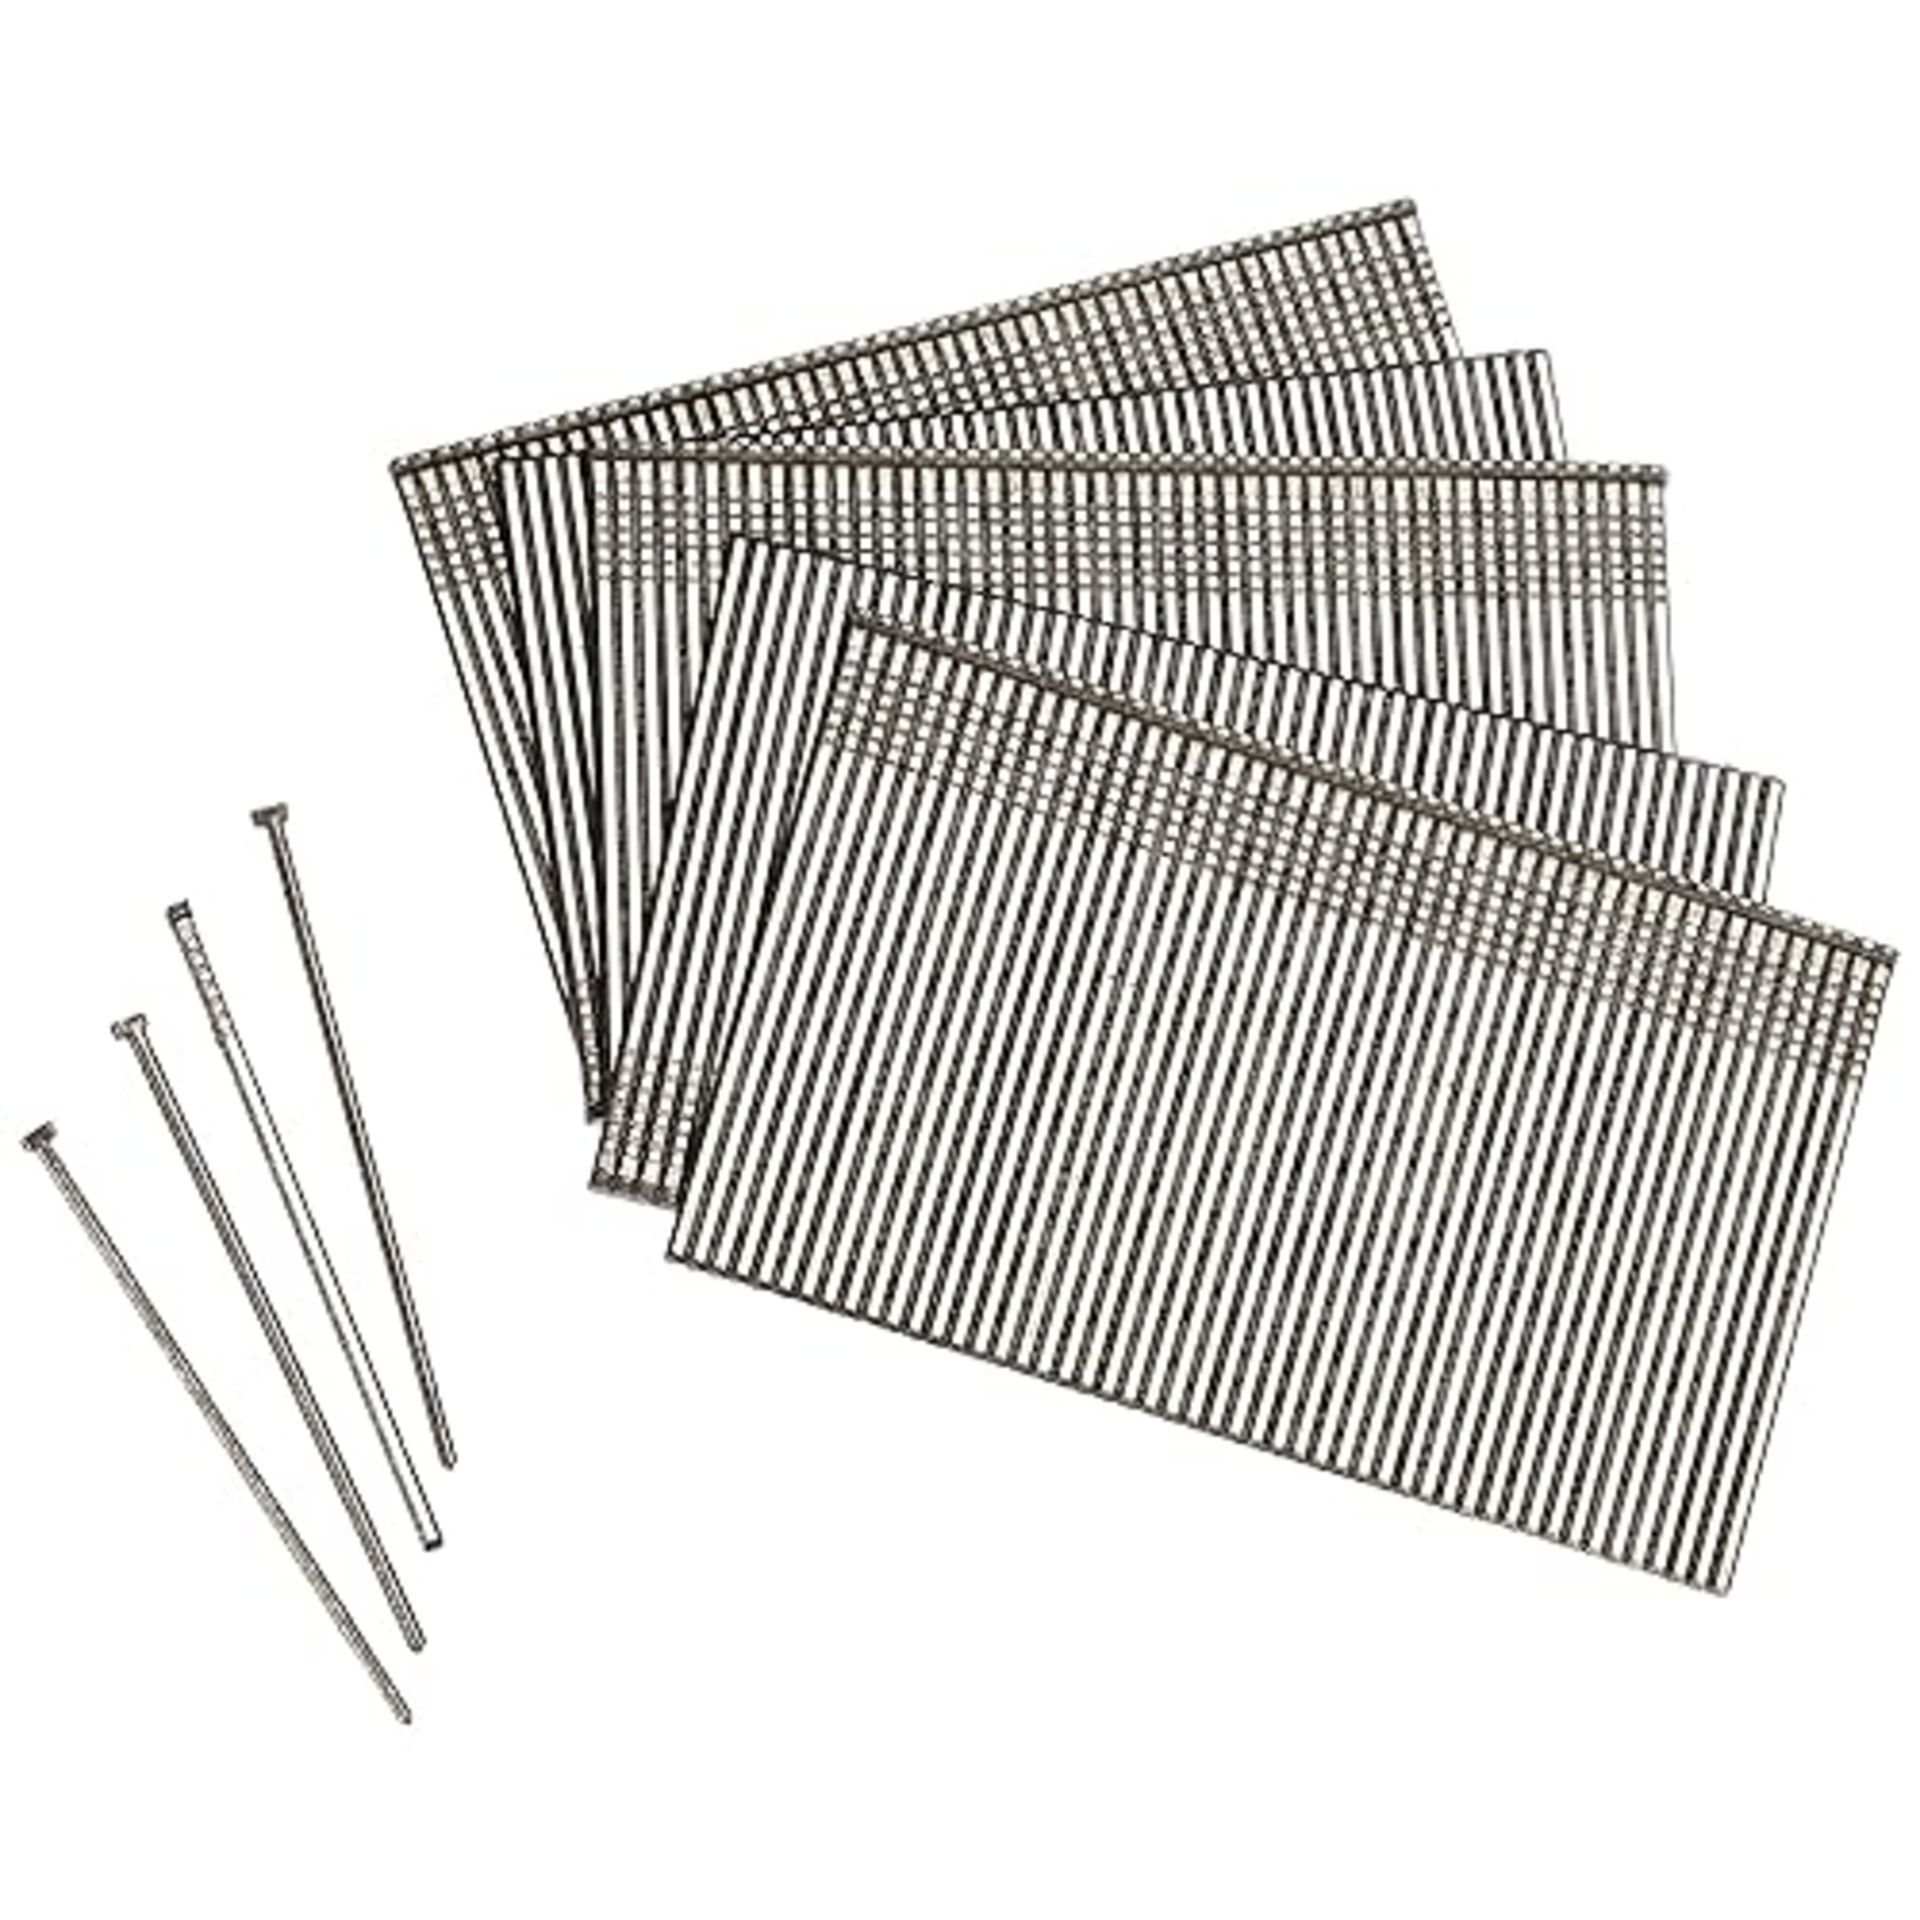 Tacwise 1098 Type 16G / 50 Mm Stainless Steel Finish Nails, Pack of 1000